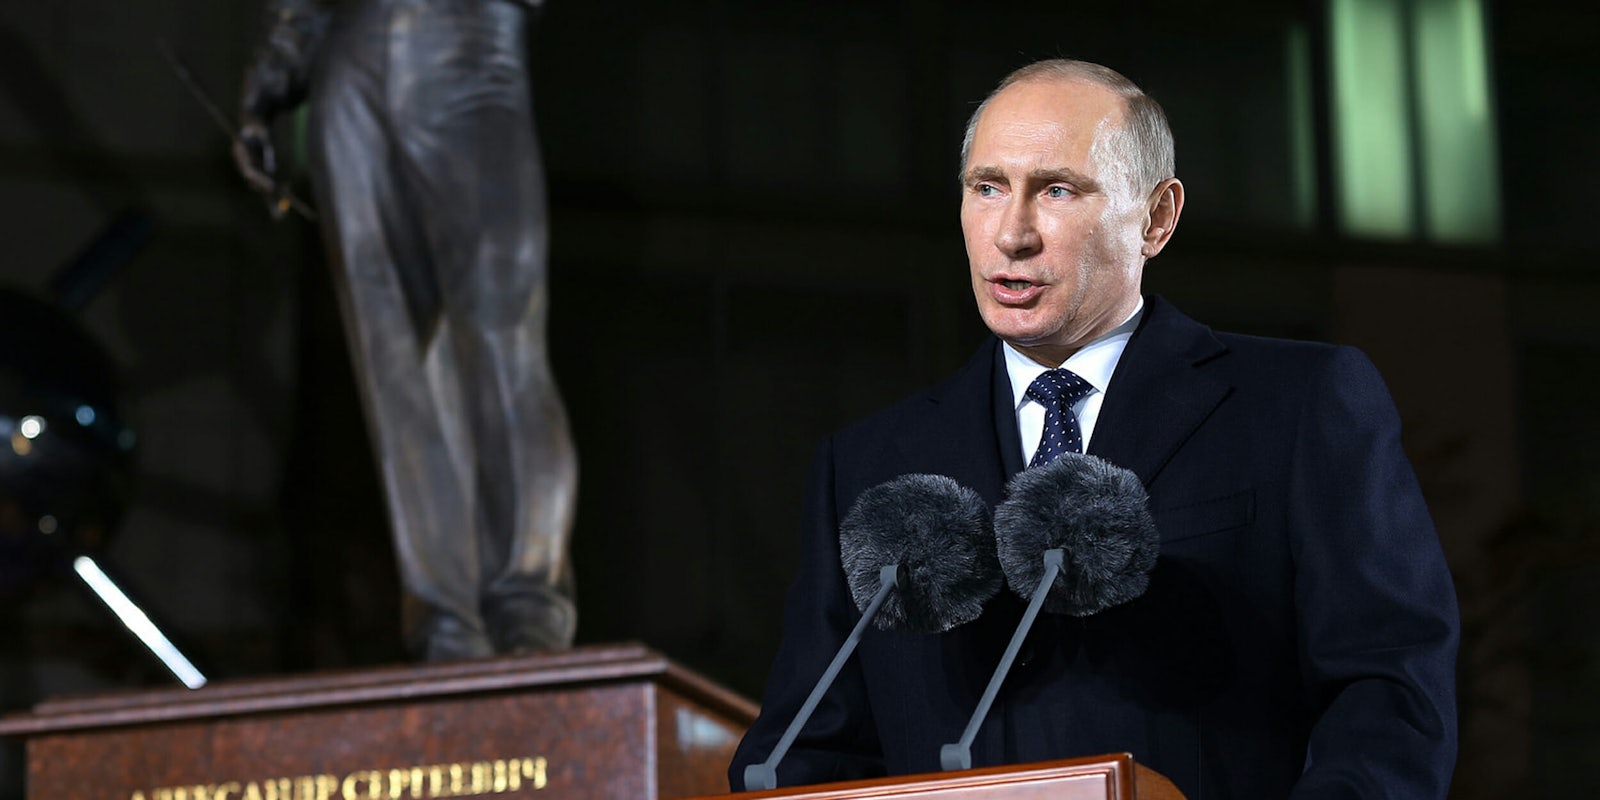 Vladimir Putin speaking a a podium. Russia's hacking efforts ahead of the 2016 election went well beyond Hillary Clinton’s campaign and the Democratic National Committee, according to a trove of documents obtained by the Associated Press.